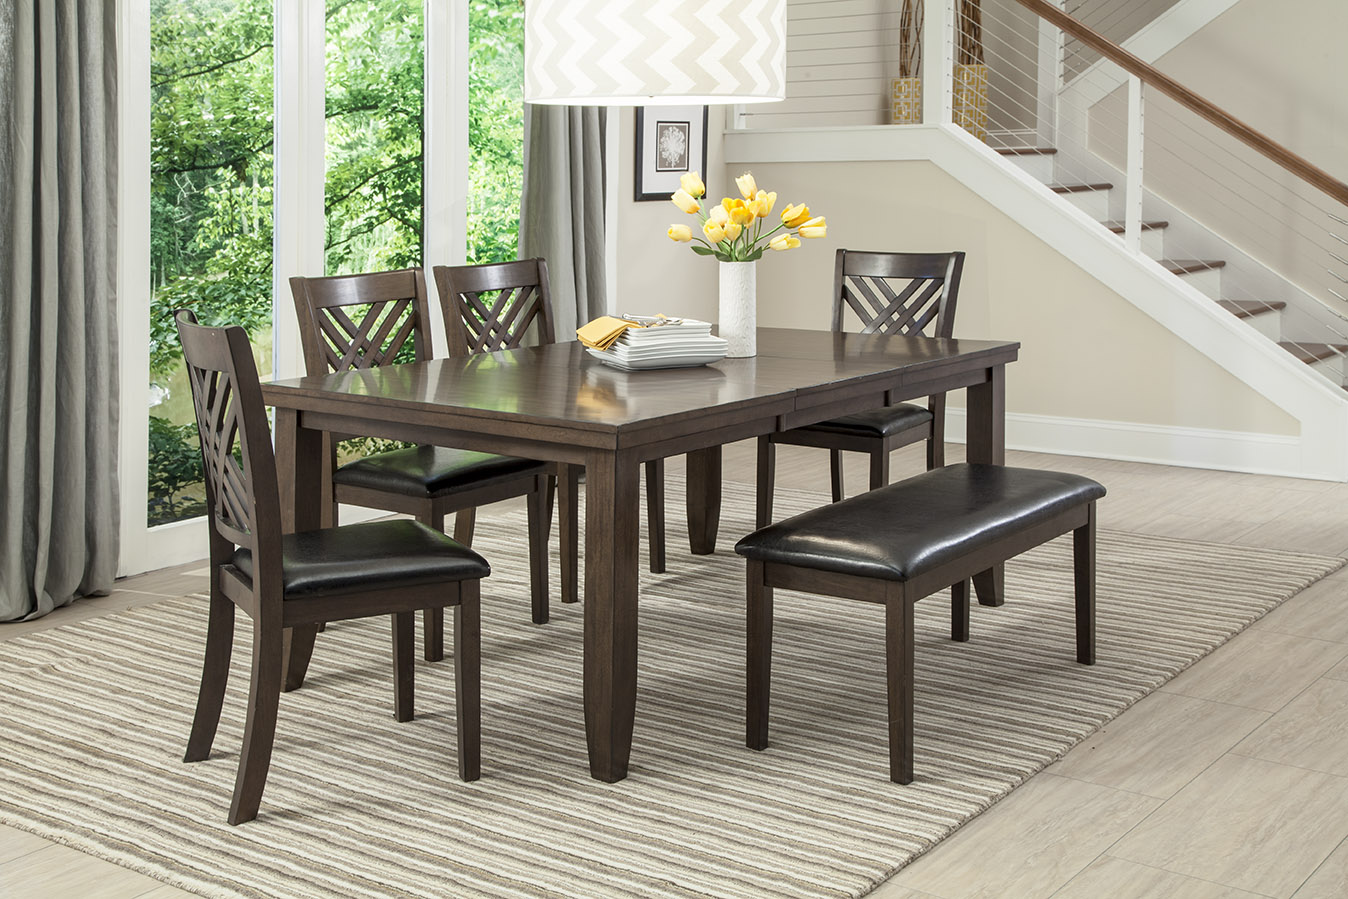 GL-4918 Dynamite Dining Table